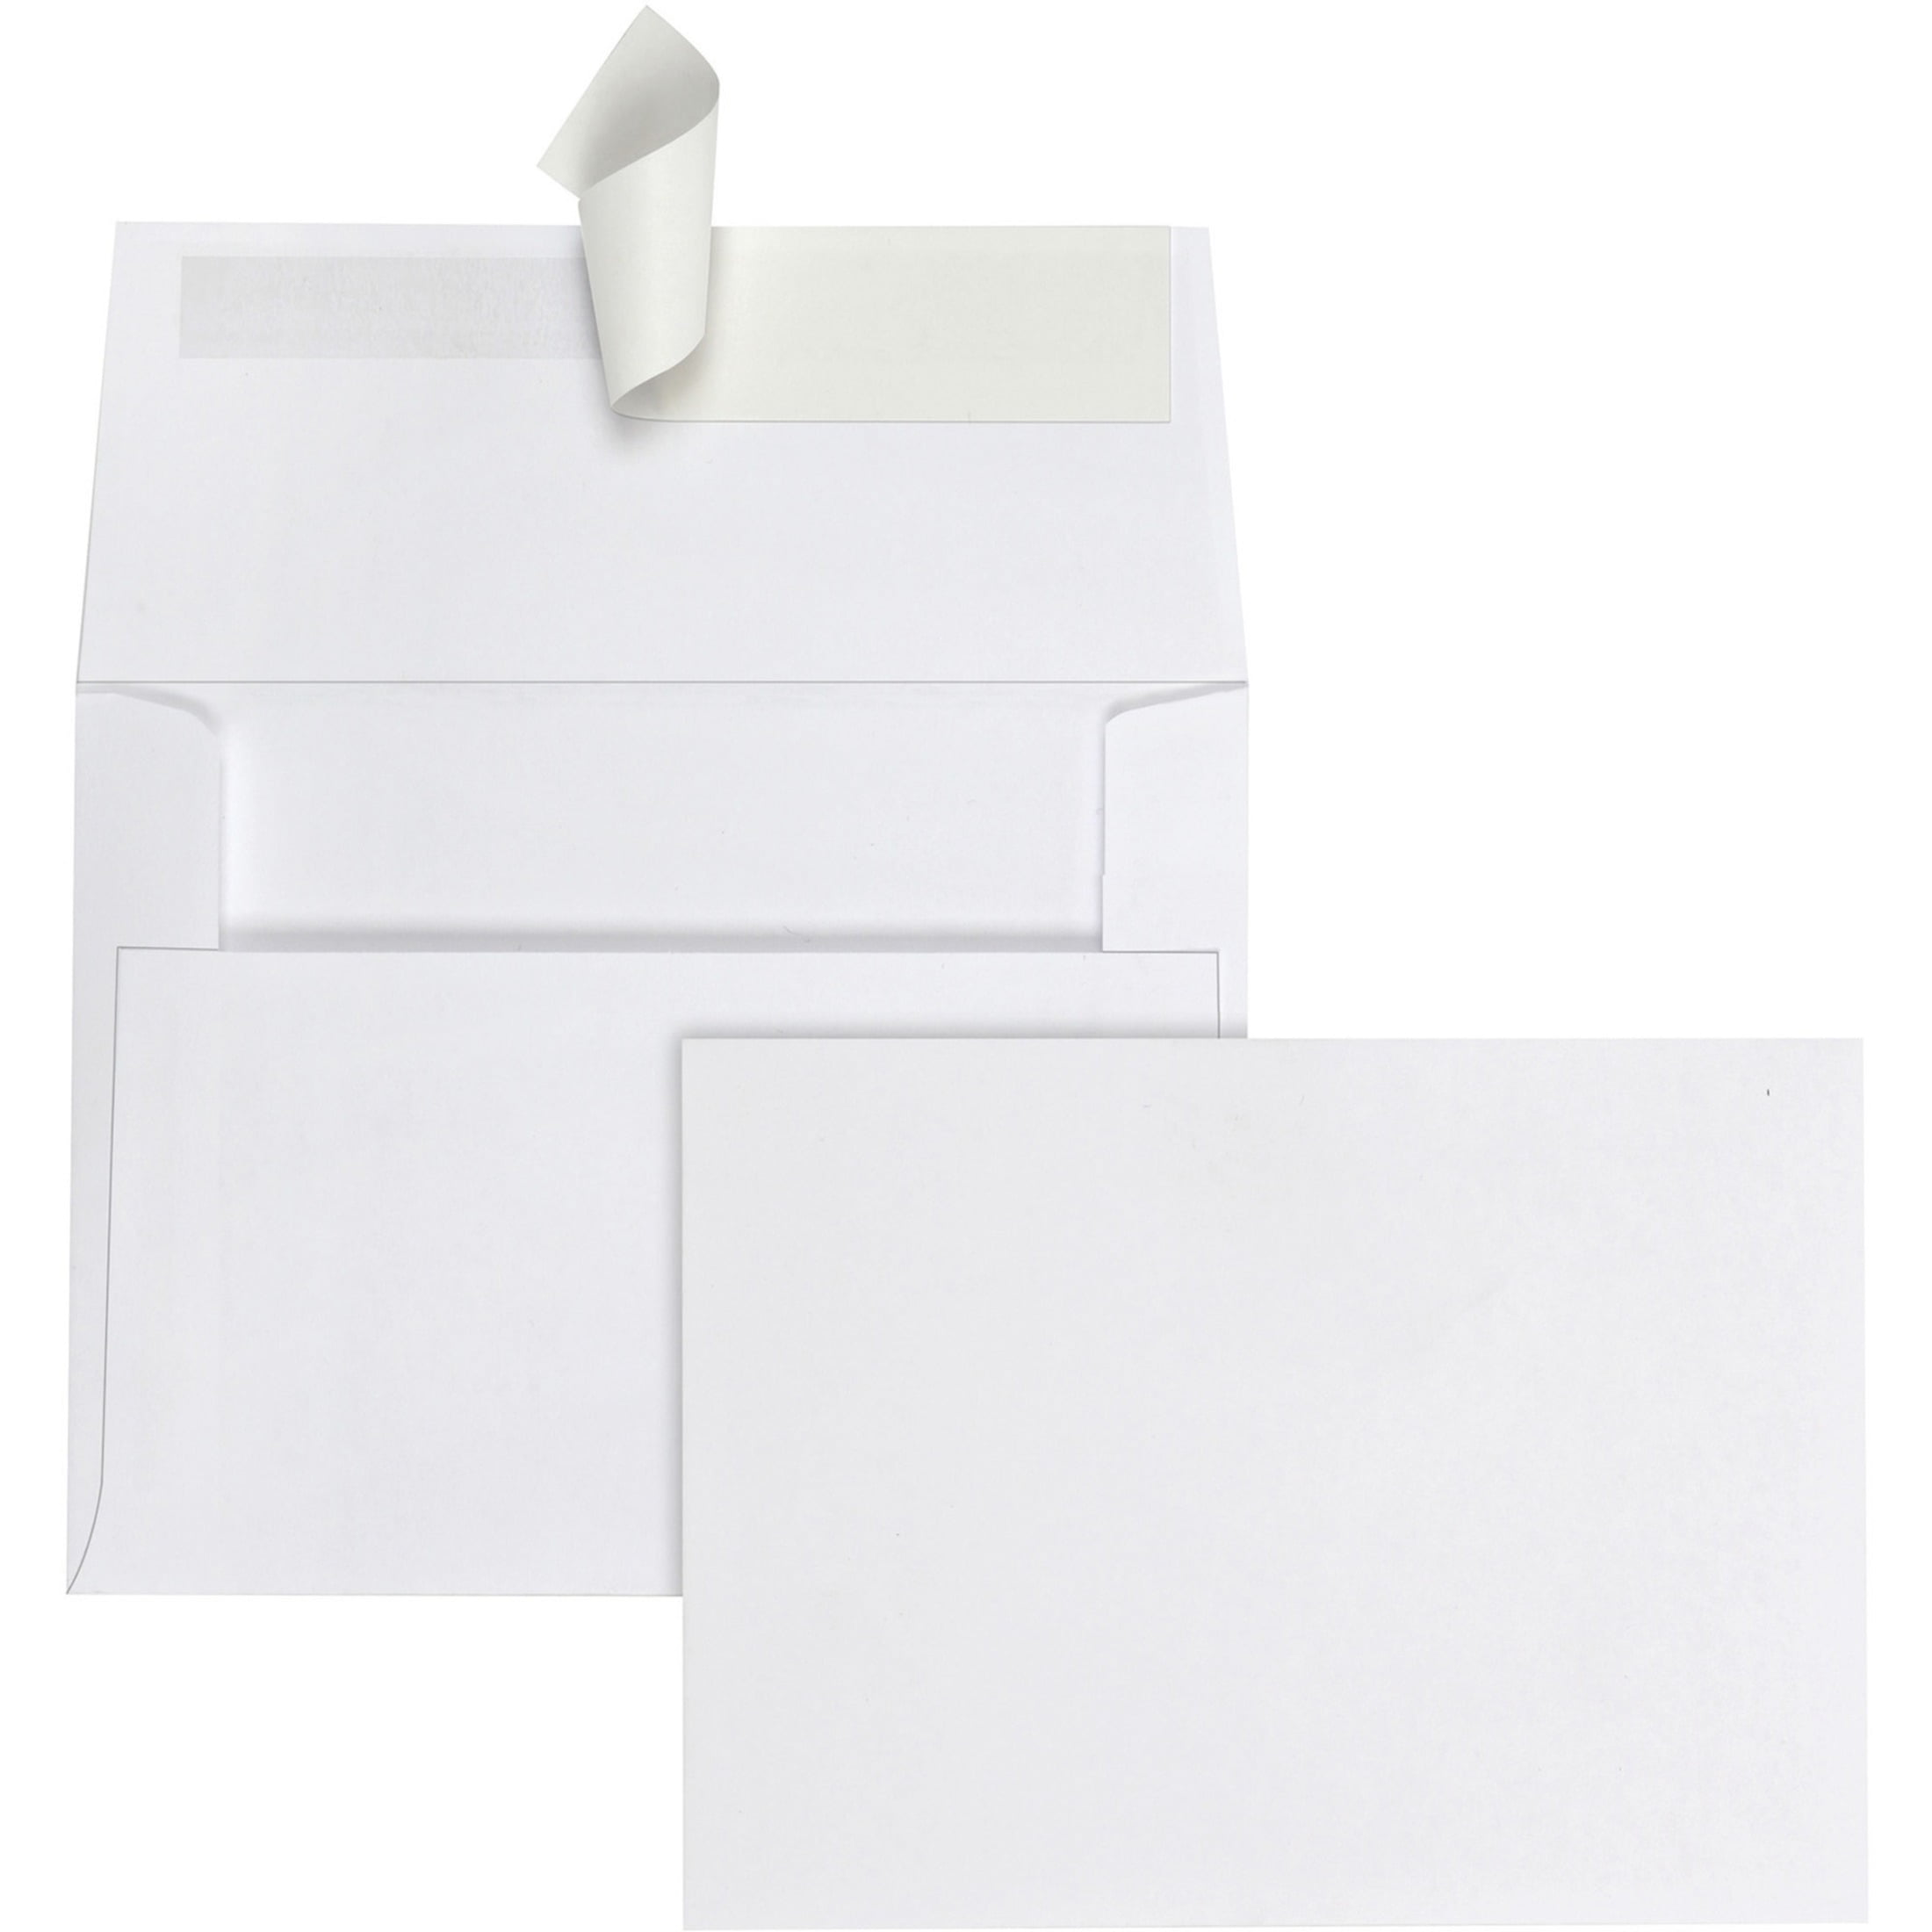 White C5 Envelopes 100% RECYCLED 90gsm PREMIUM Gummed Seal Window HIGH QUALITY 